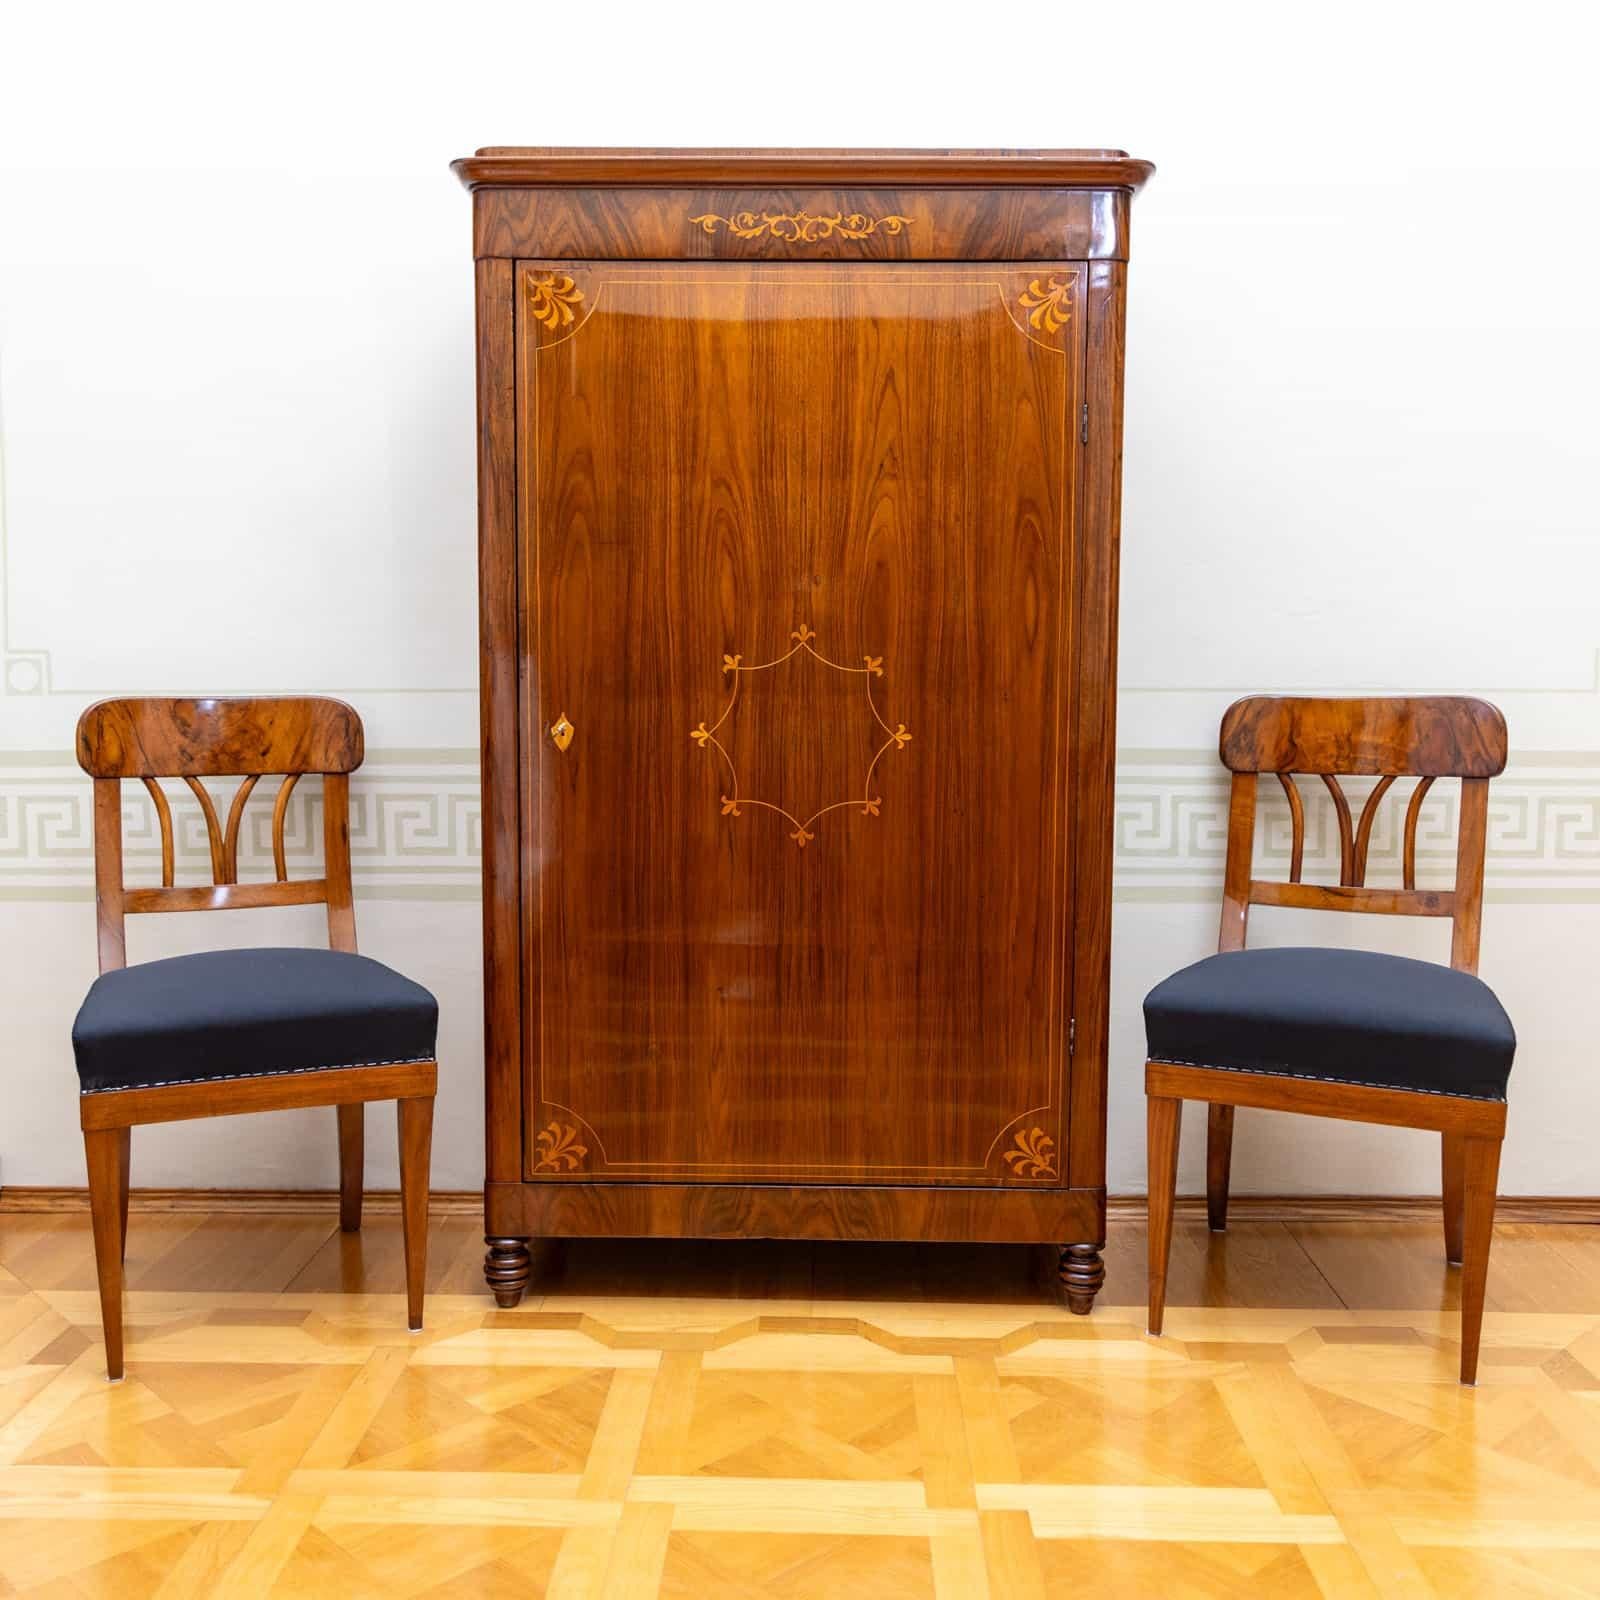 Single-door cabinet on turned legs with smooth doors and rounded corners. The cabinet is veneered in walnut and features elegant thread inlays and leaf decorations on the front. The cabinet has been restored and polished by hand. The interior